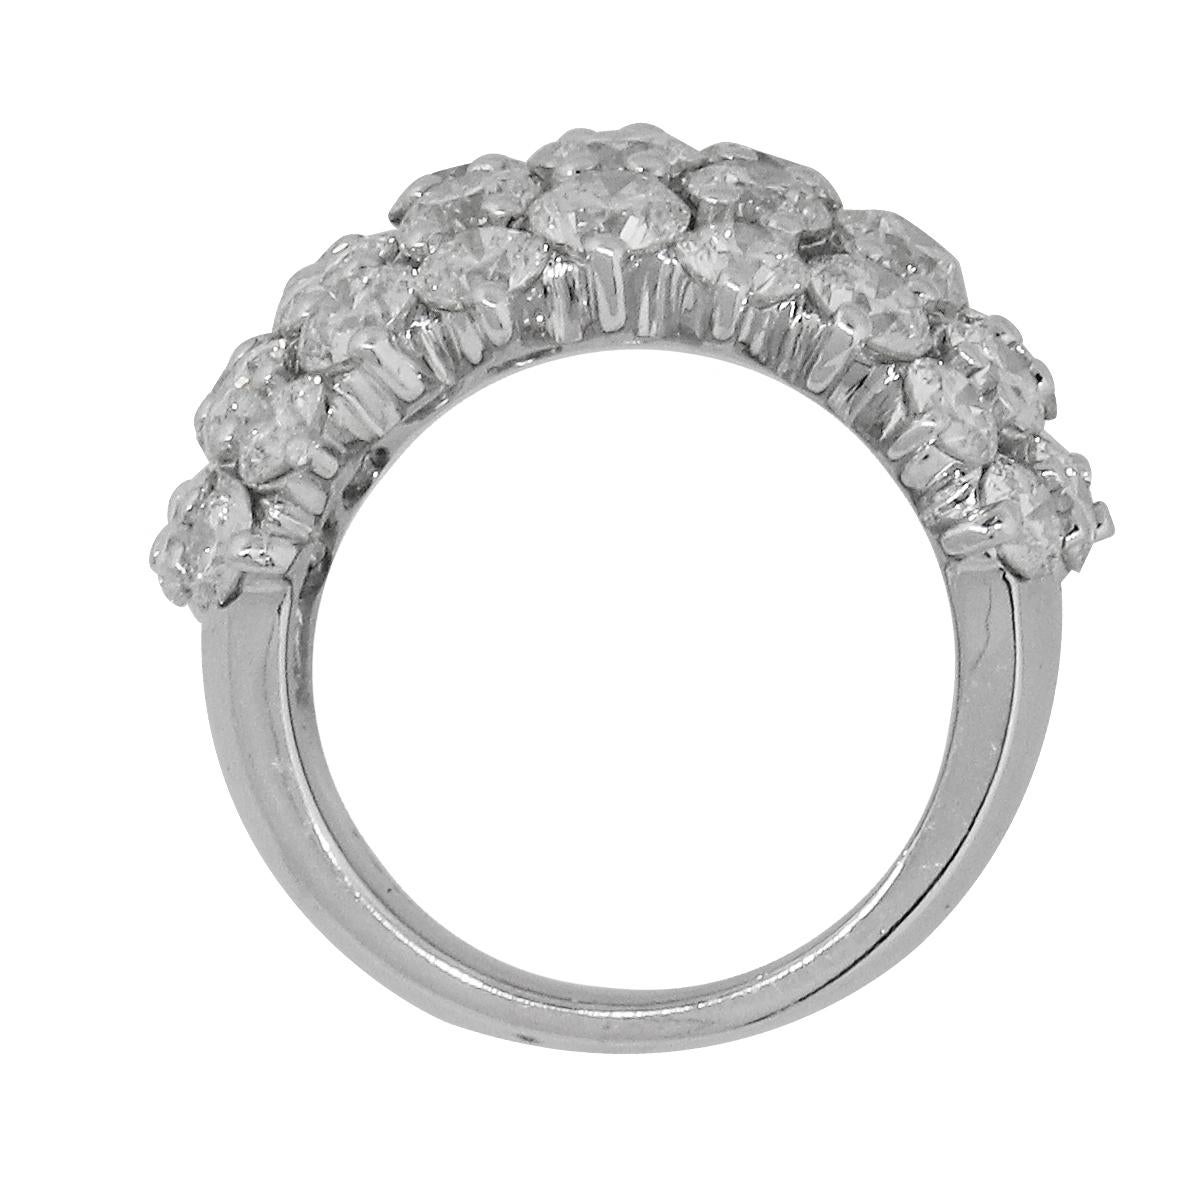 Material: 14k White Gold
Diamond Details: Total of 45 Diamonds. Approximately 7.17ctw of round brilliant diamonds. Diamonds are G/H in color and VS in clarity
Ring Size: 6.5
Ring Measurements: 0.96″ x 0.78″ x 0.96″
Total Weight: 16.7g (10.7dwt)
SKU: